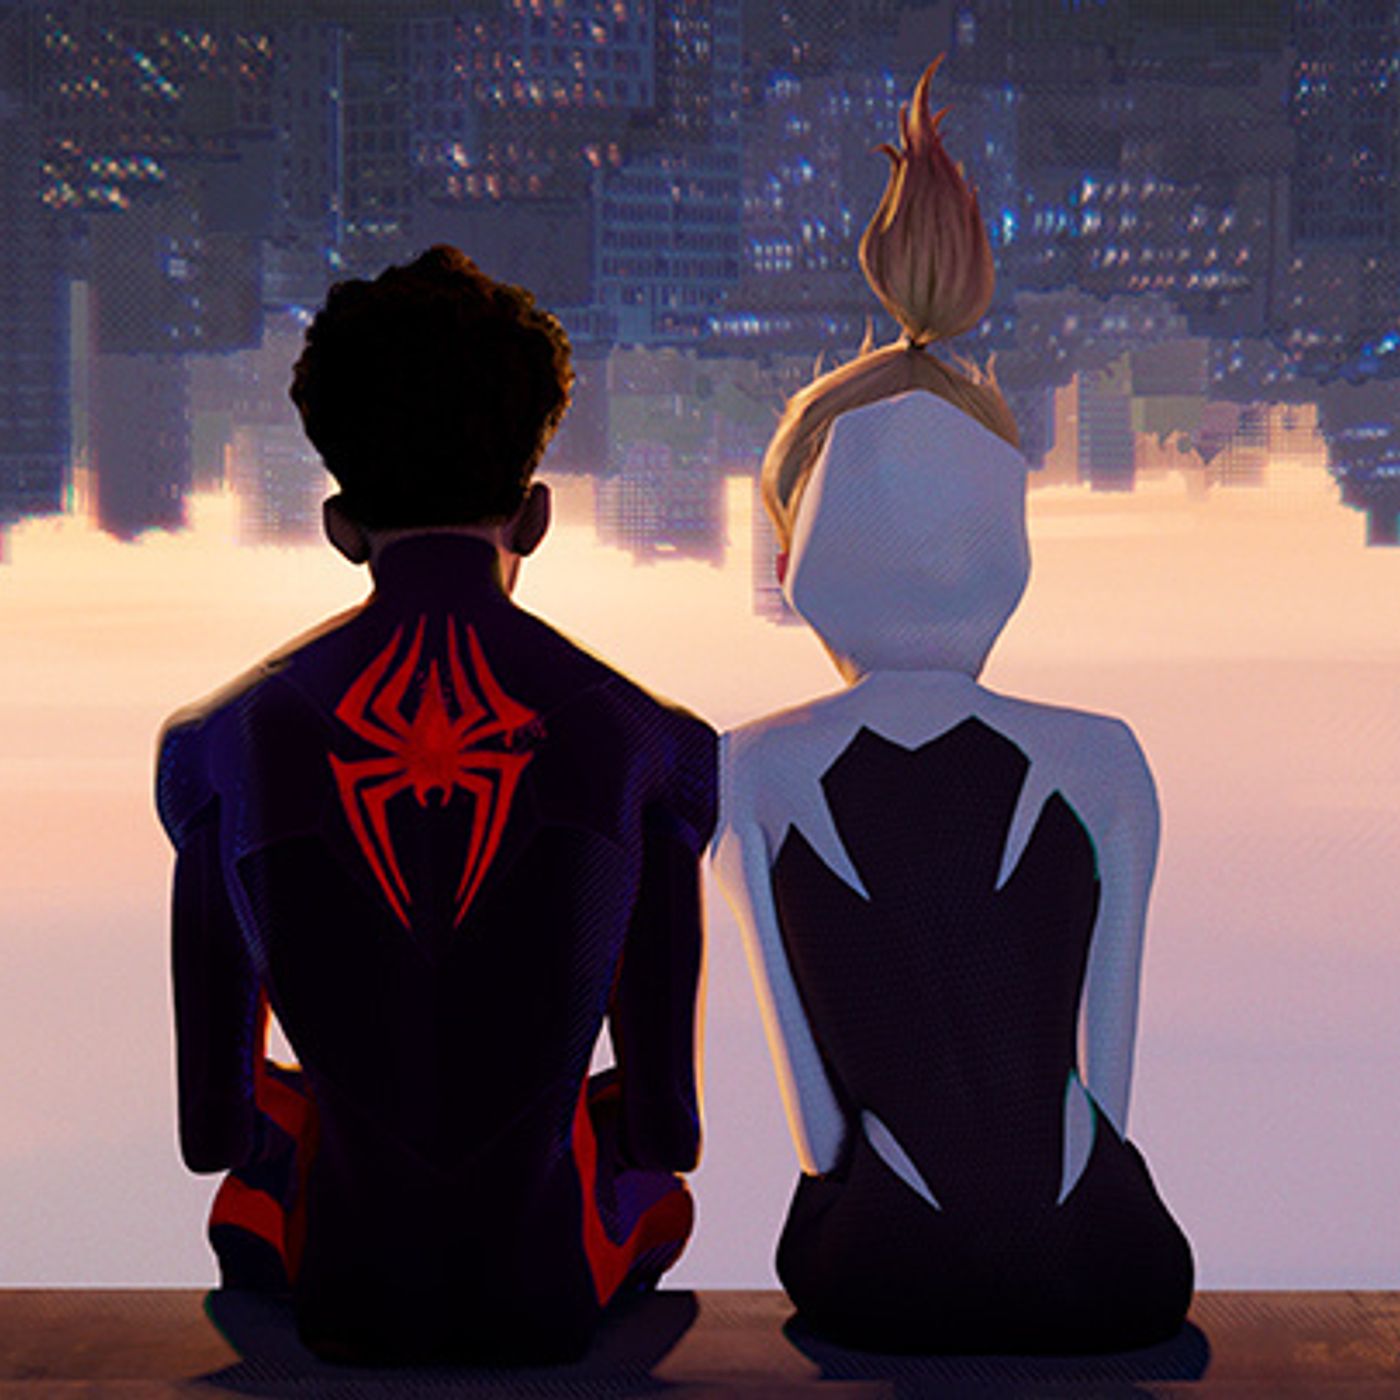 Ep. 725 - Spider-Man: Across the Spider-Verse (GUEST: Dan Gvozden from The Amazing Spider-Talk)